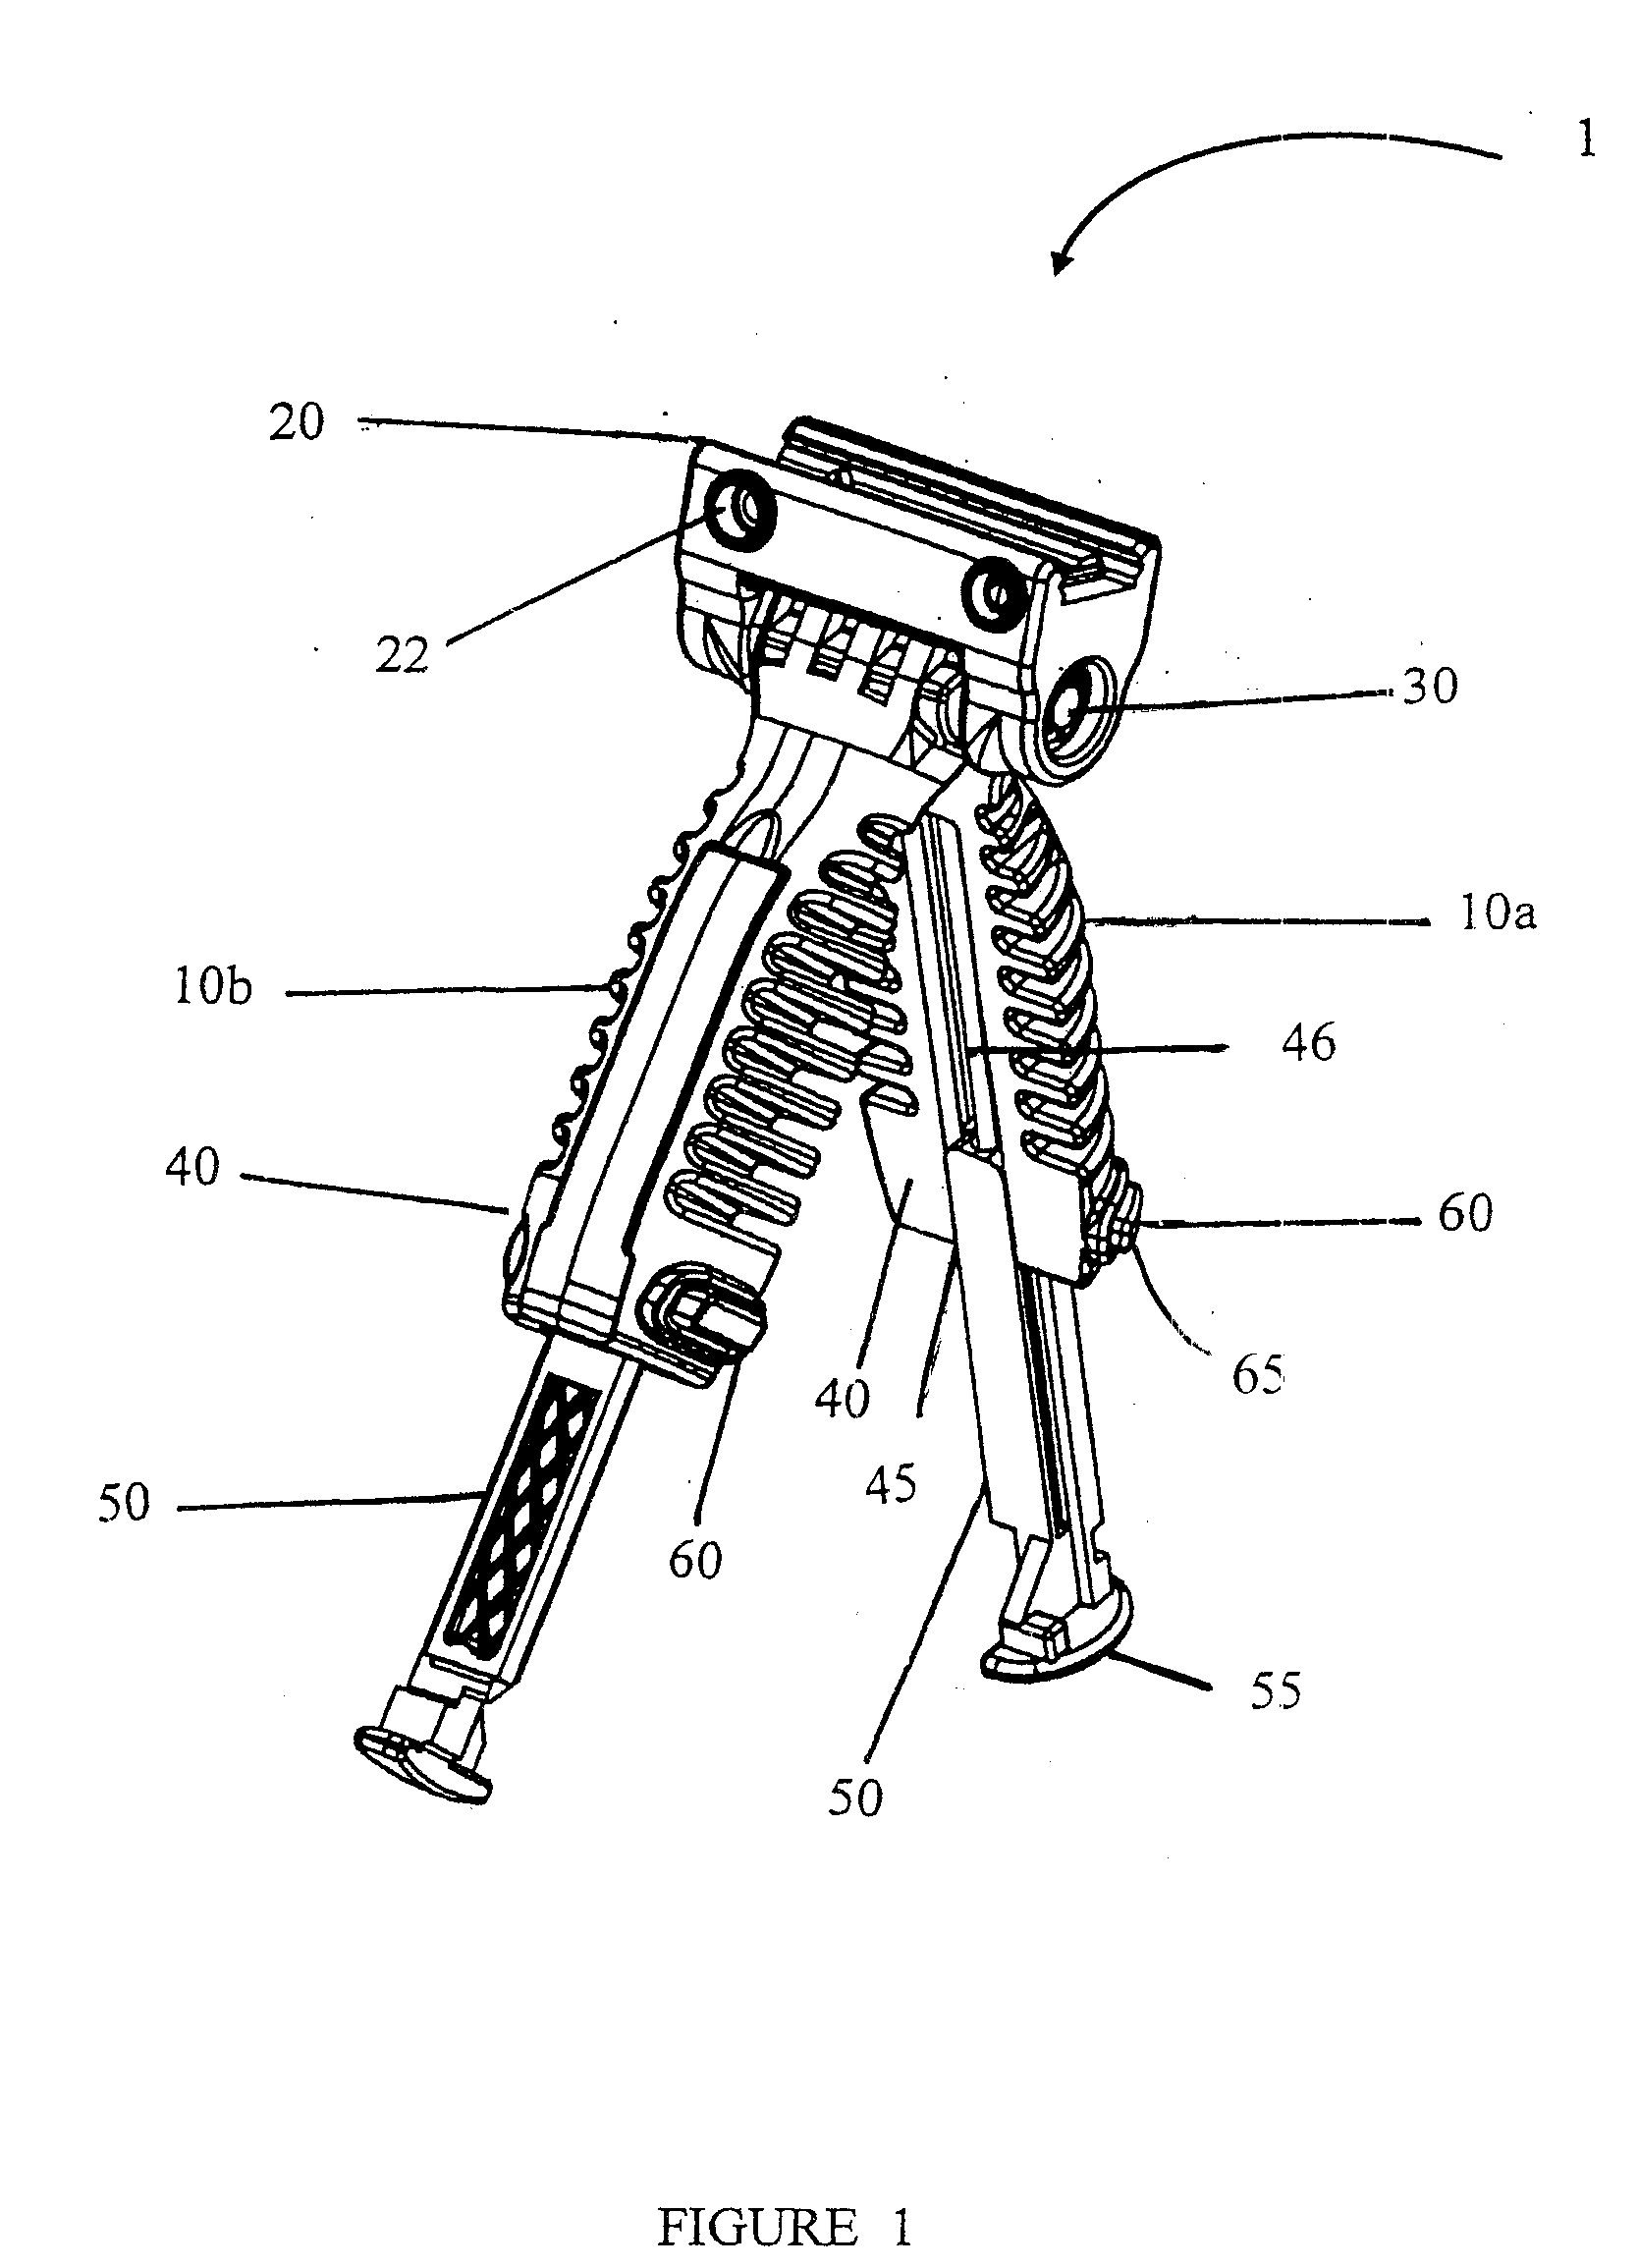 Grip with bipod